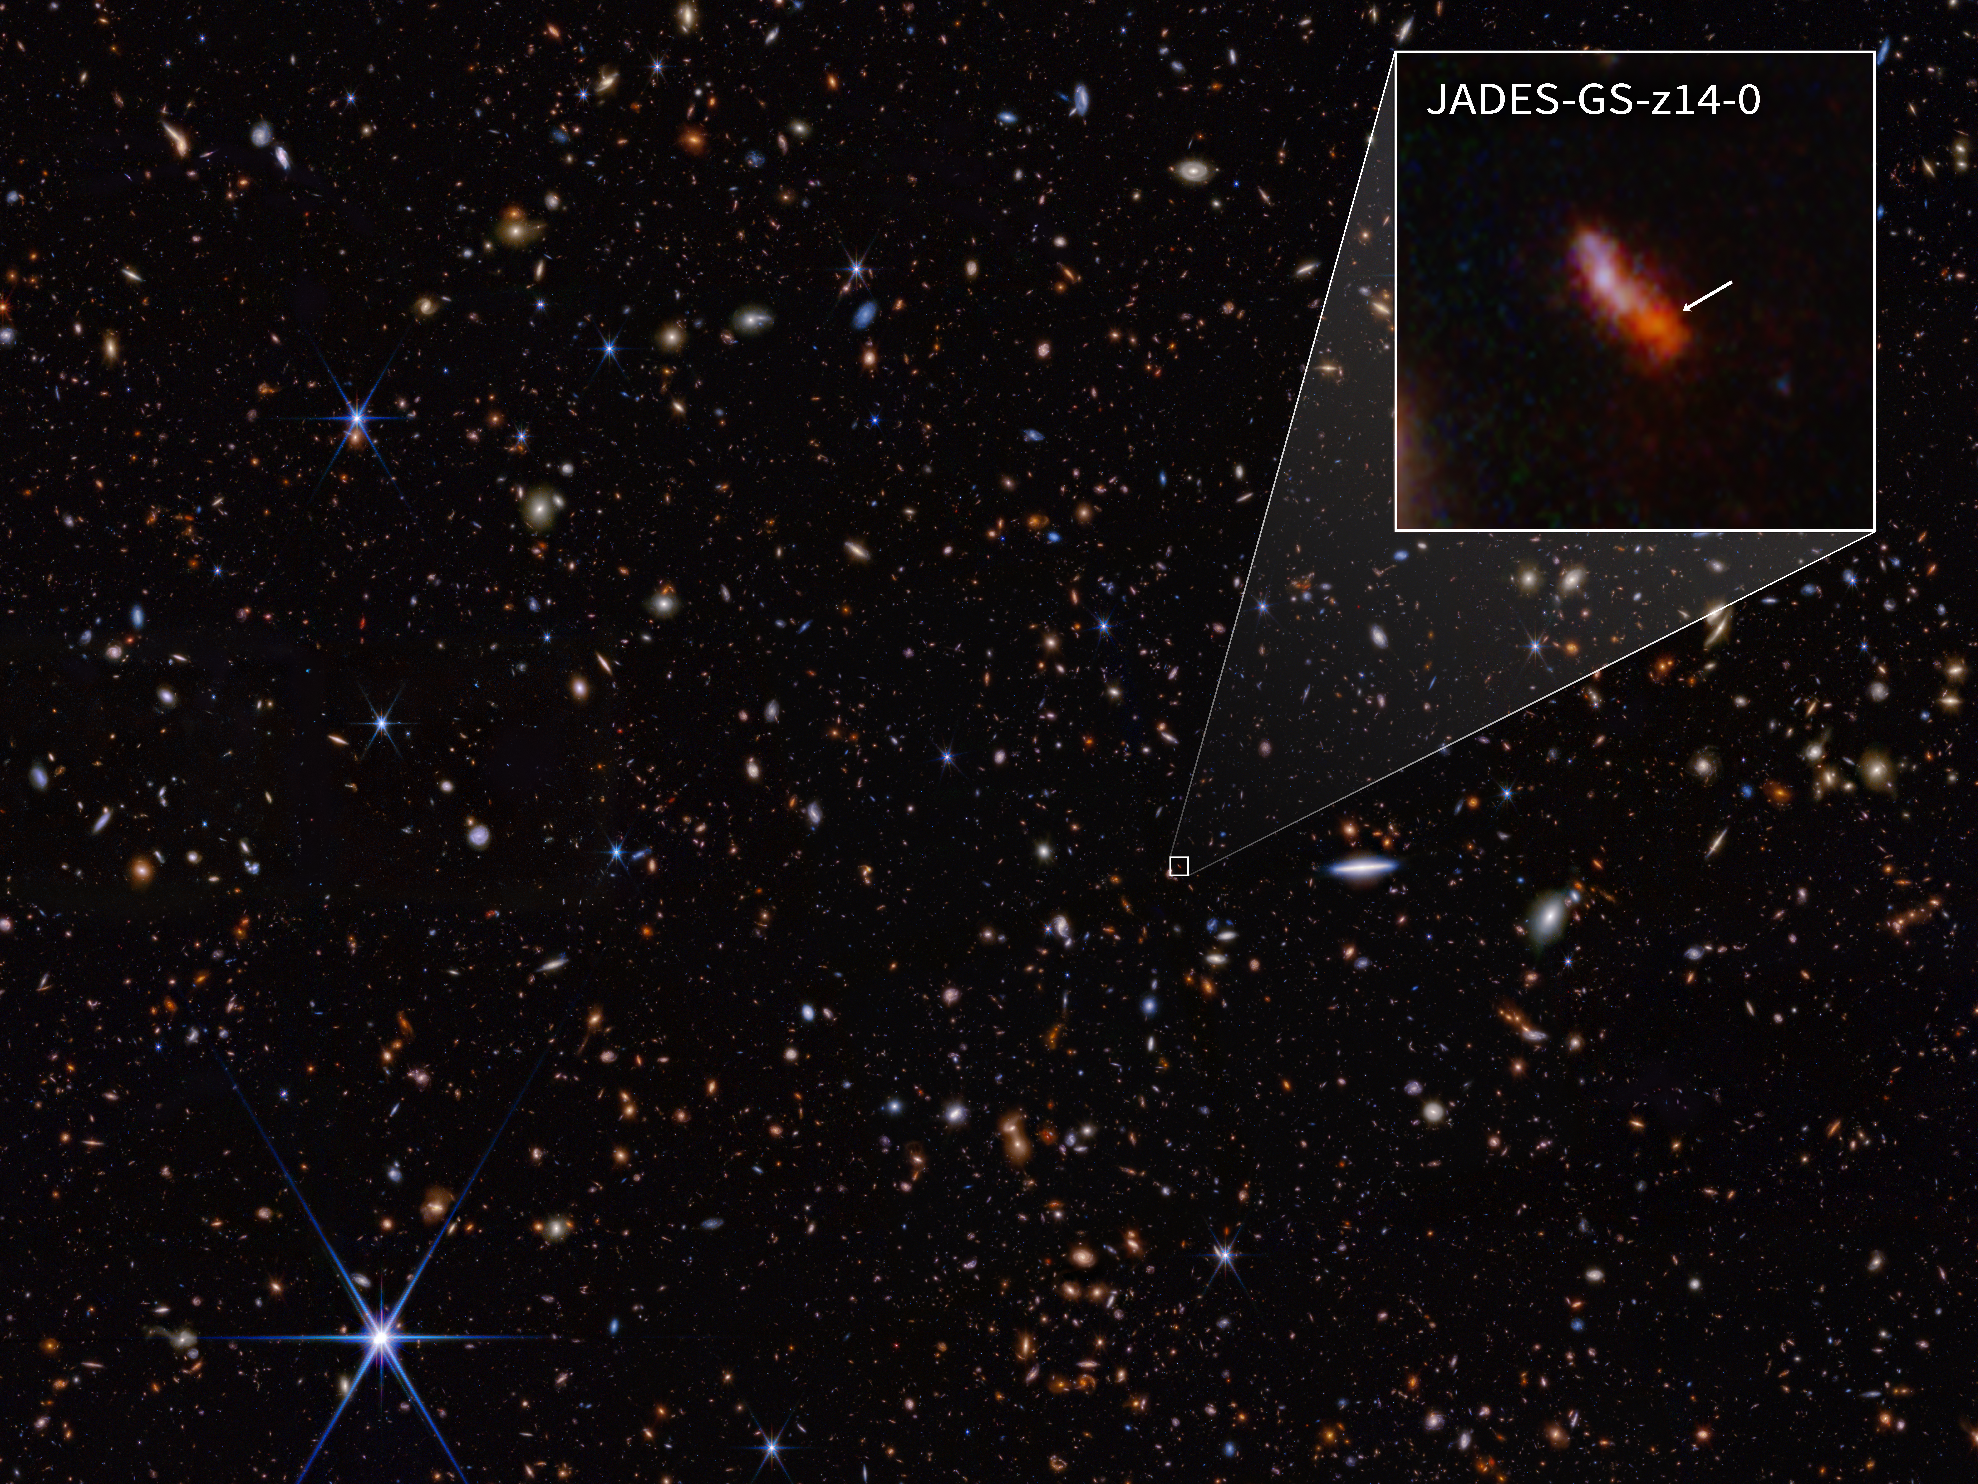 This infrared image from NASA’s James Webb Space Telescope (also called Webb or JWST) was taken by the NIRCam (Near-Infrared Camera) for the JWST Advanced Deep Extragalactic Survey, or JADES, program